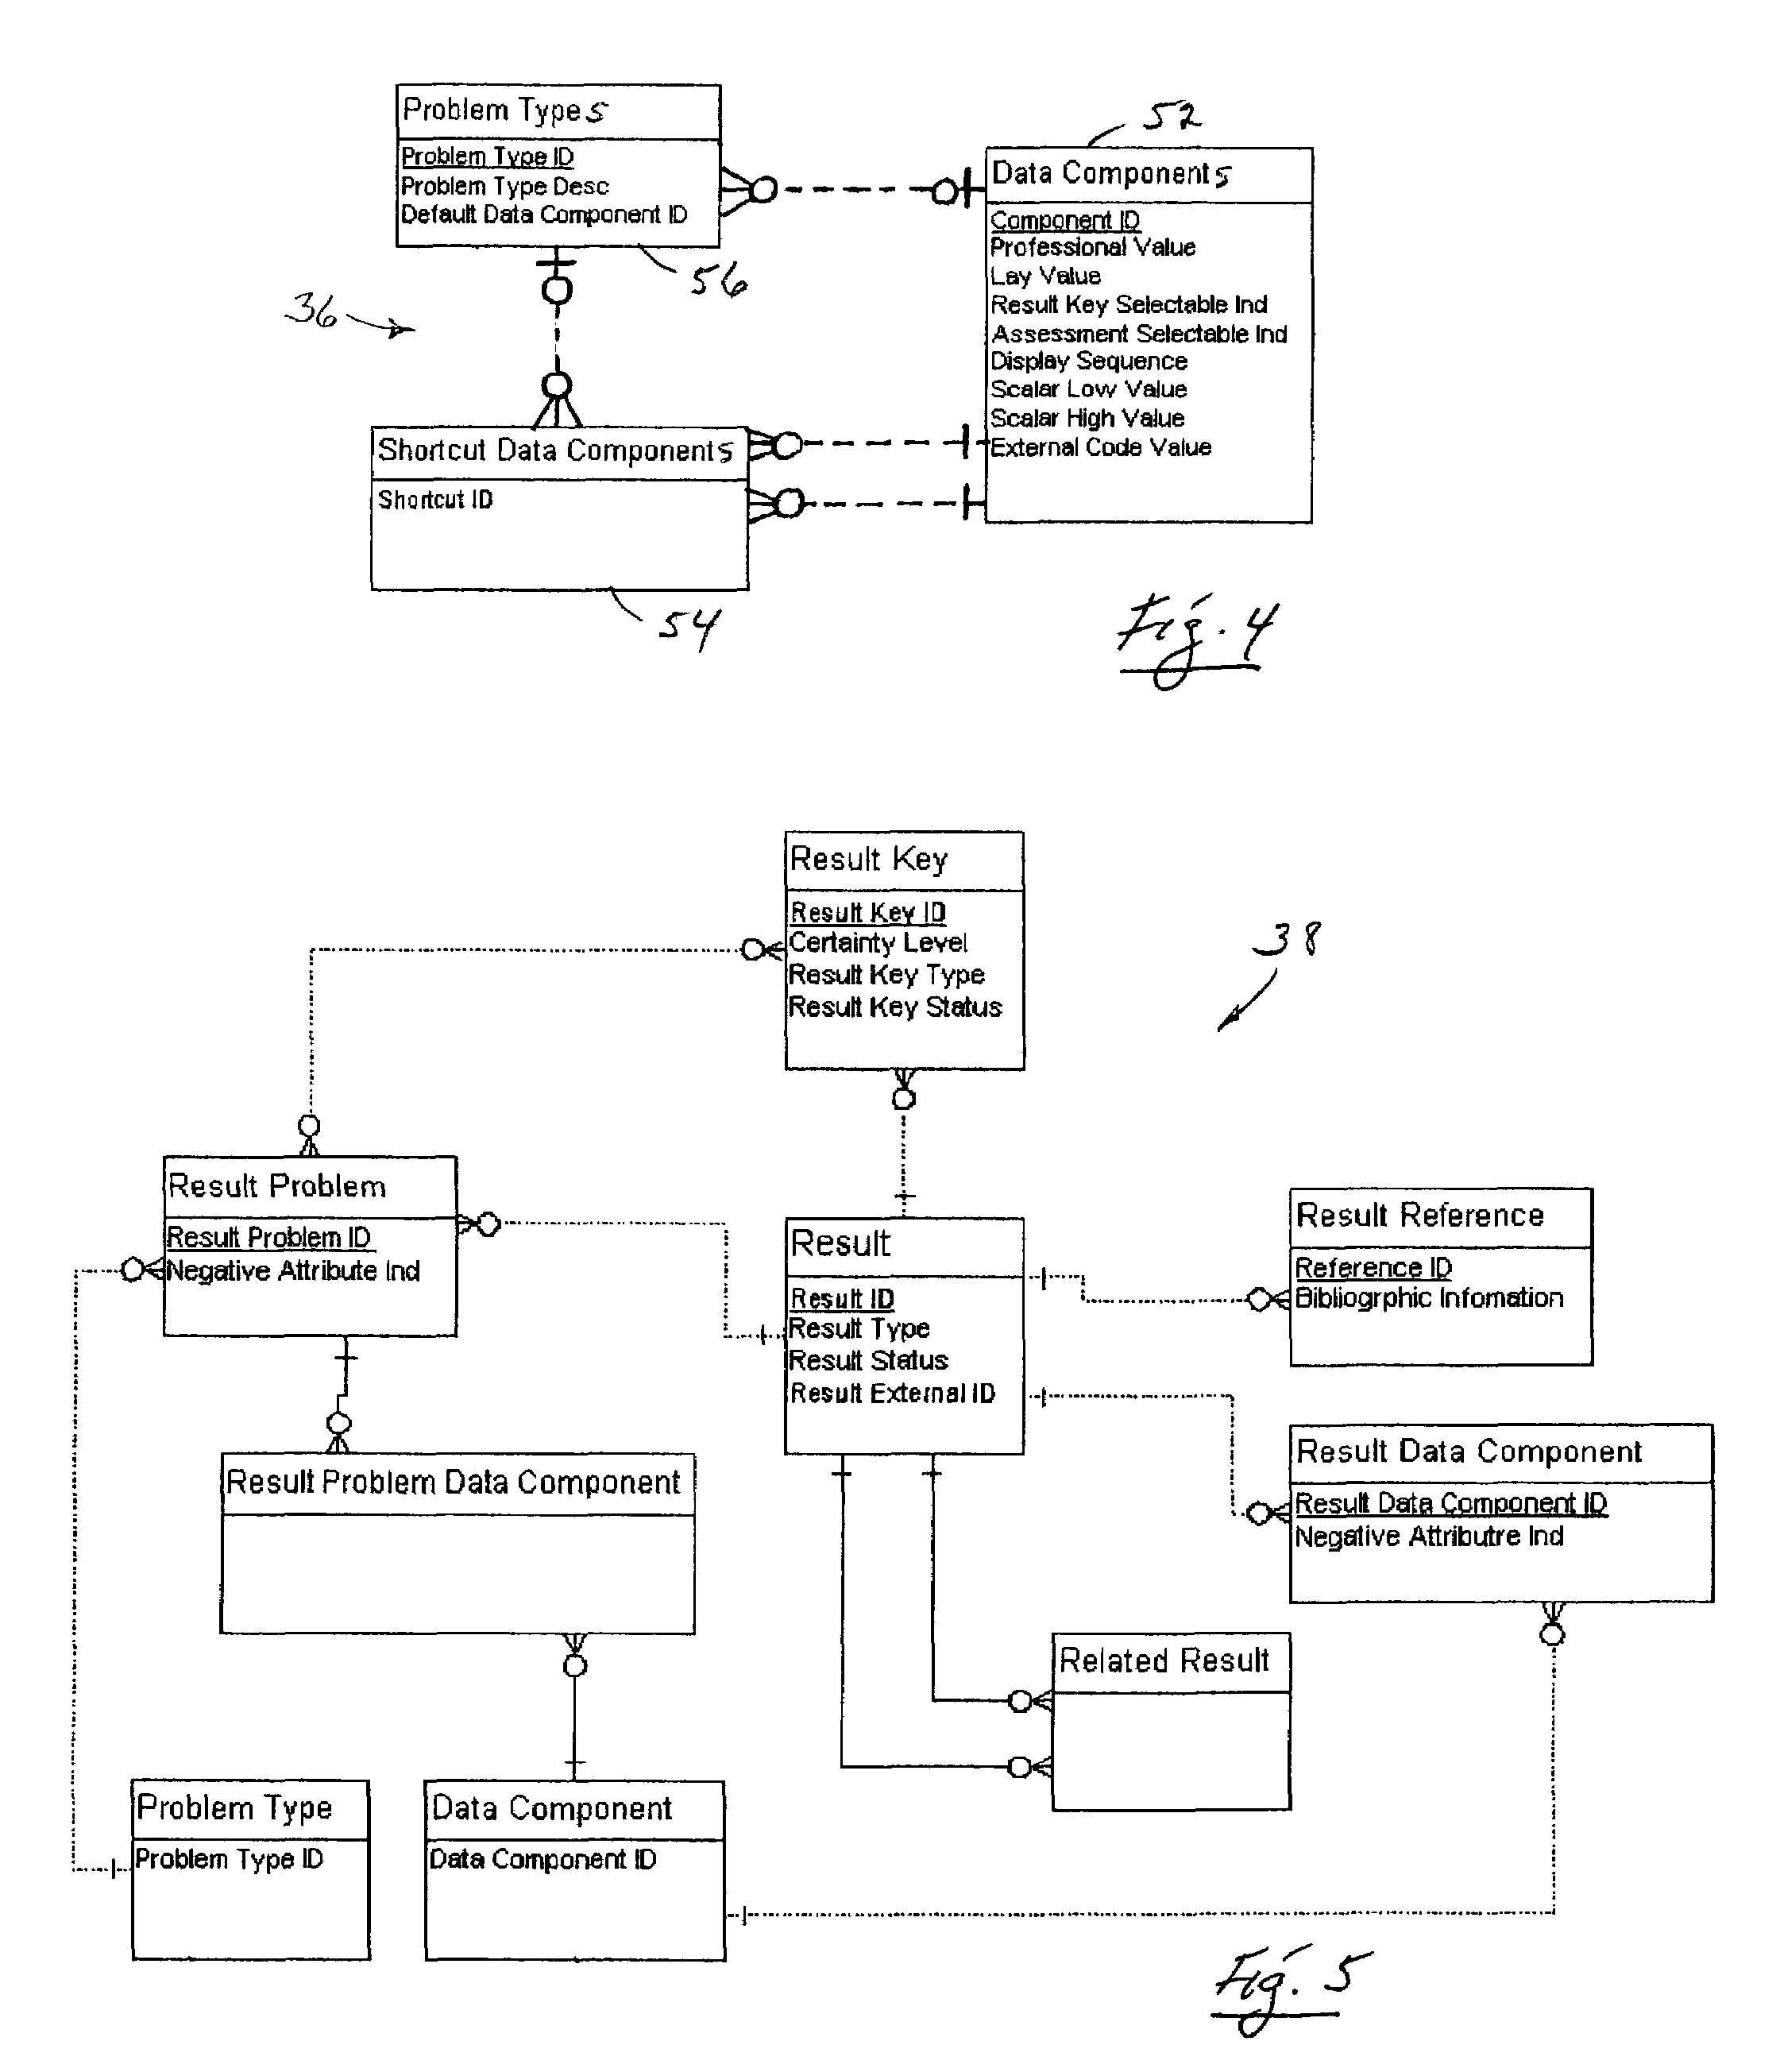 Computer-based intelligence method and apparatus for assessing selected subject-area problems and situations